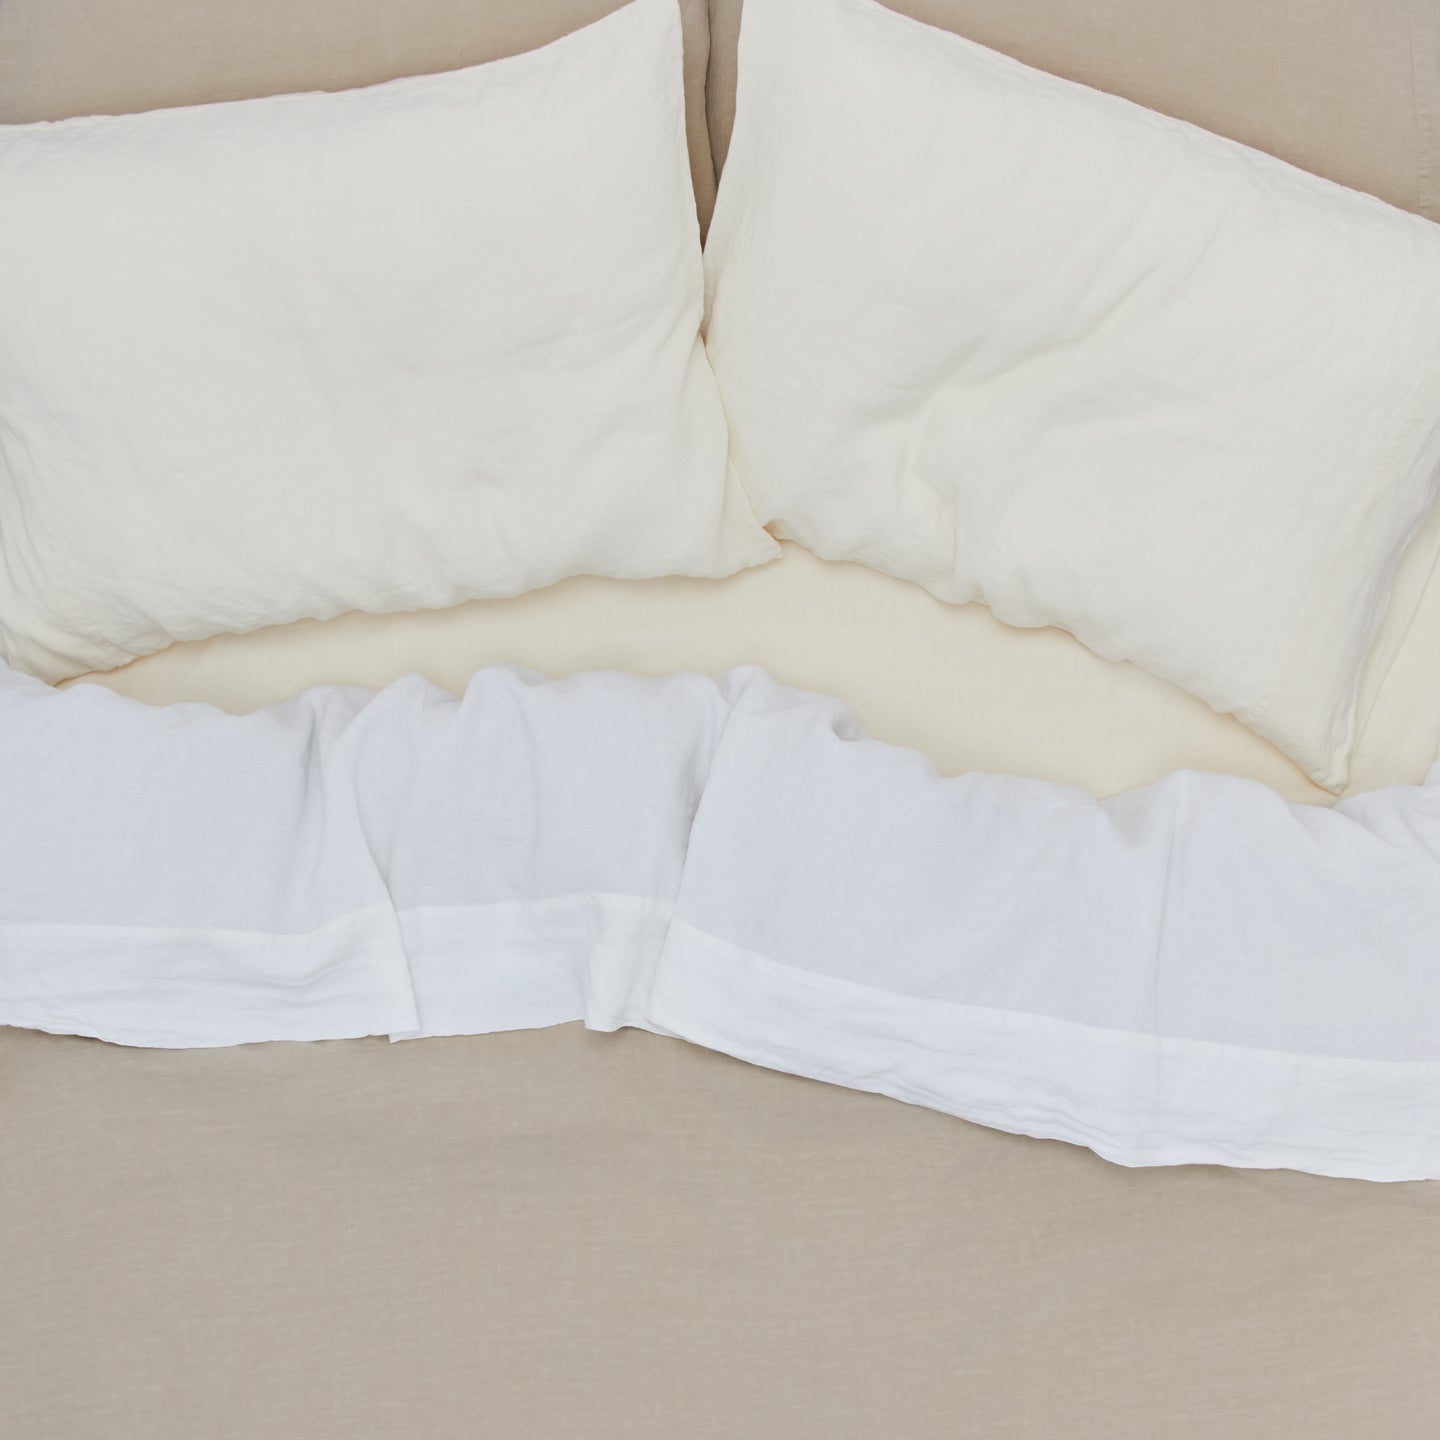 Simple Linen Pillowcases, Set of 2 - Flax